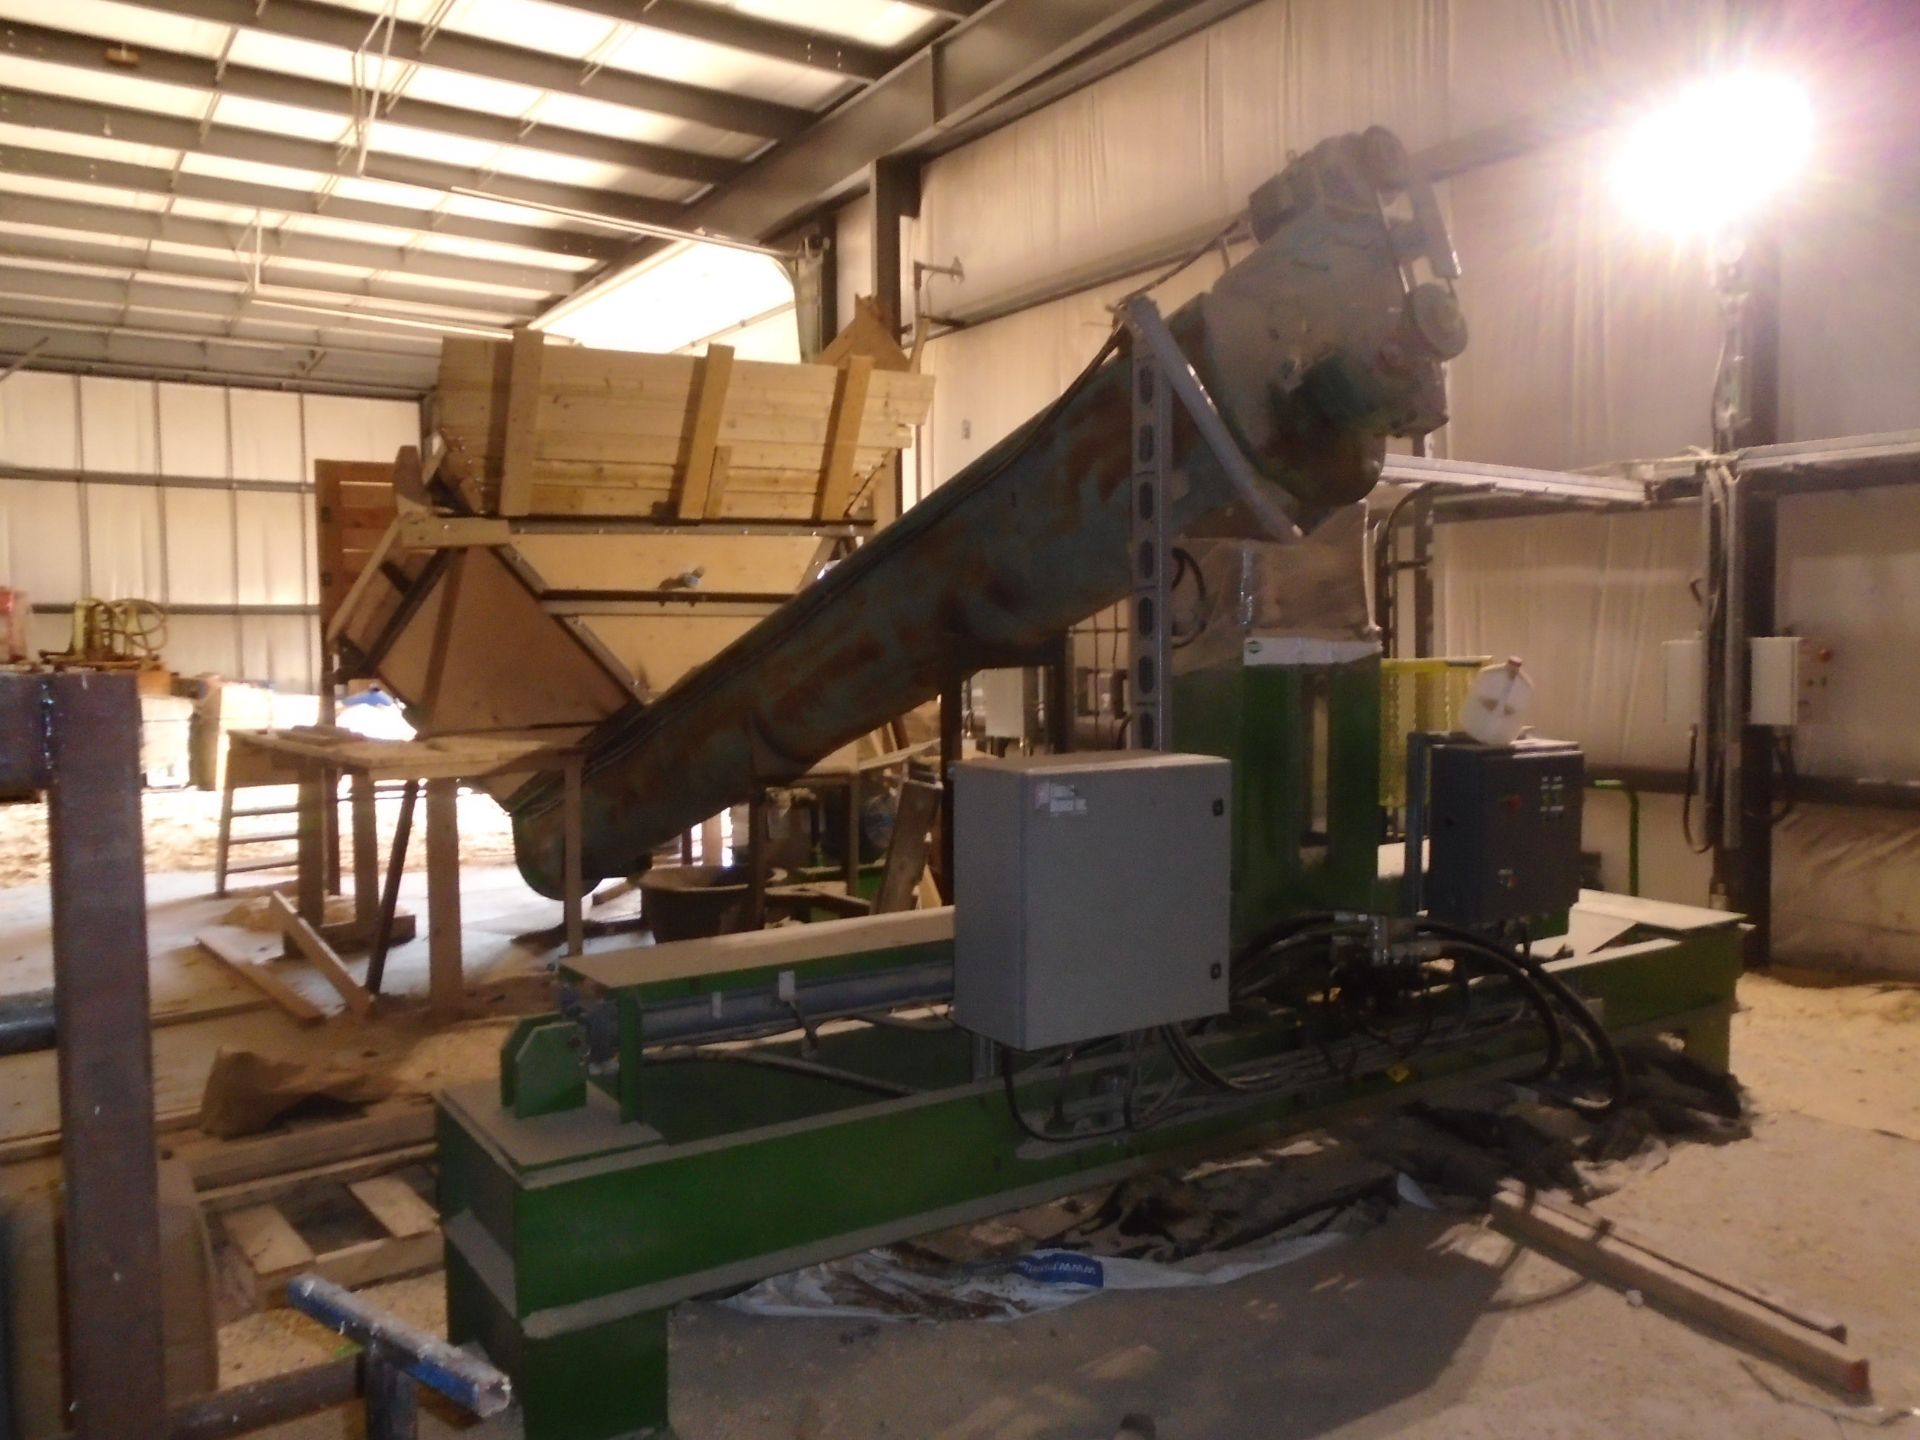 LOT/ CUSTOM VALLEY MACHINE WORKS SAWDUST/WOOD SHAVINGS BAGGING SYSTEM WITH ELECTRONIC CONTROLS AND